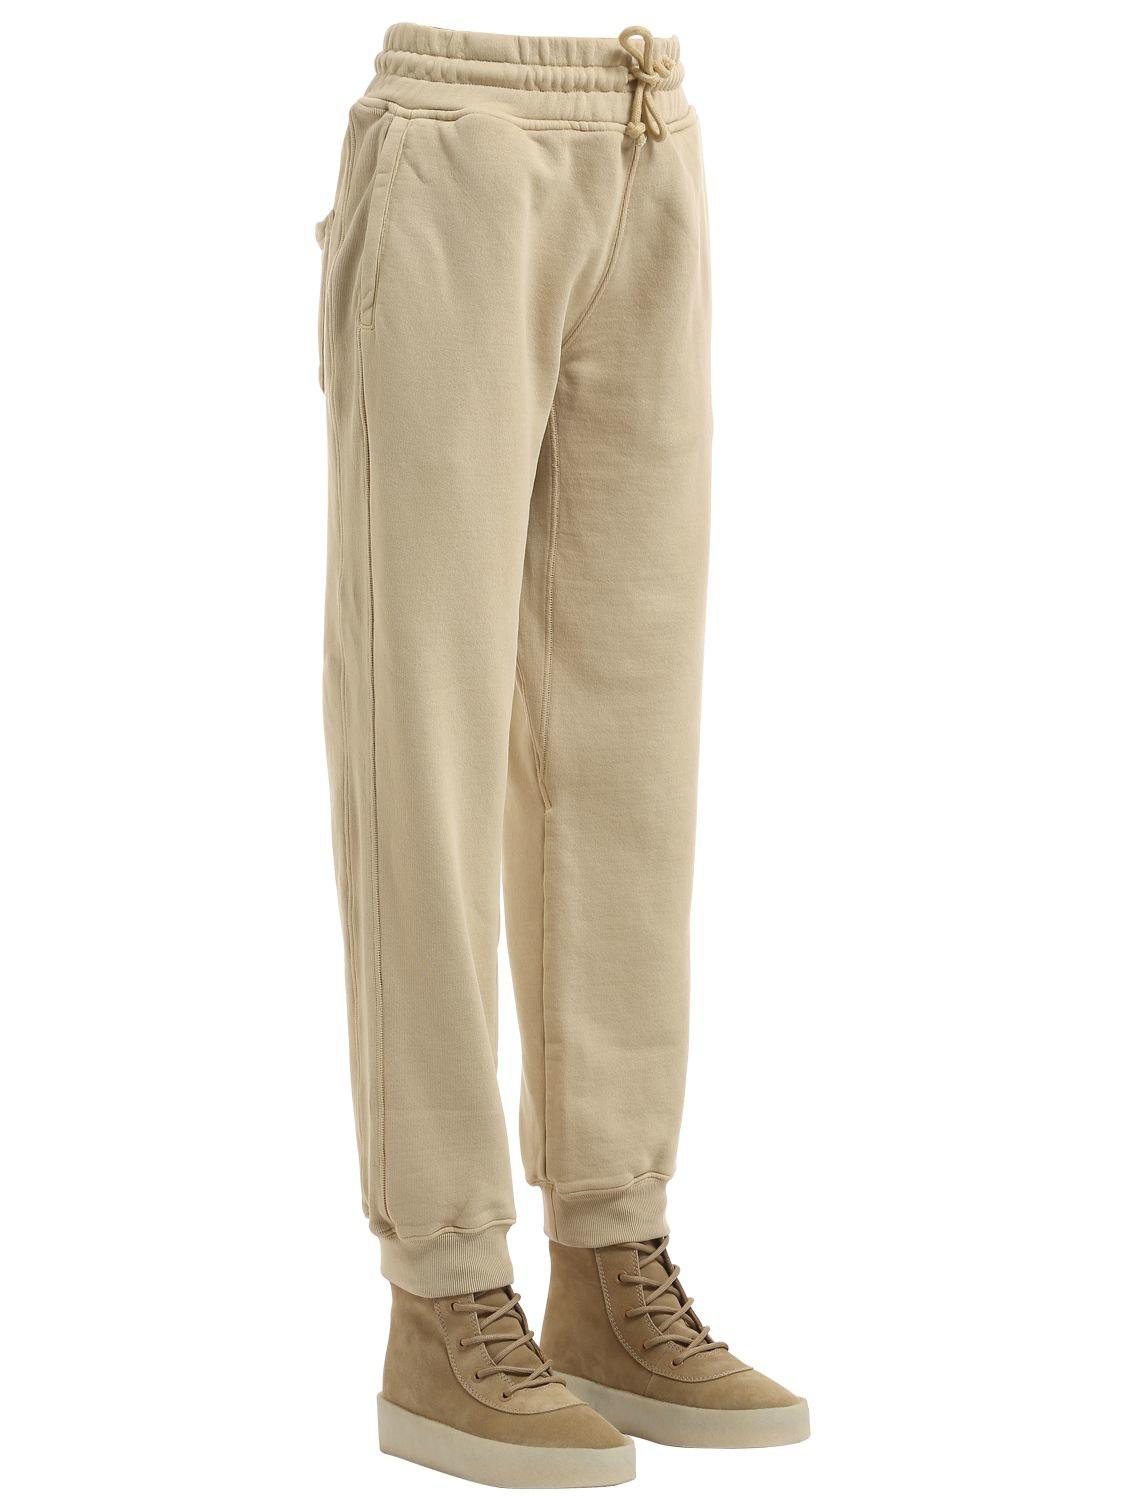 Yeezy Paneled Cotton Sweatpants in Green/Beige (Natural) - Lyst